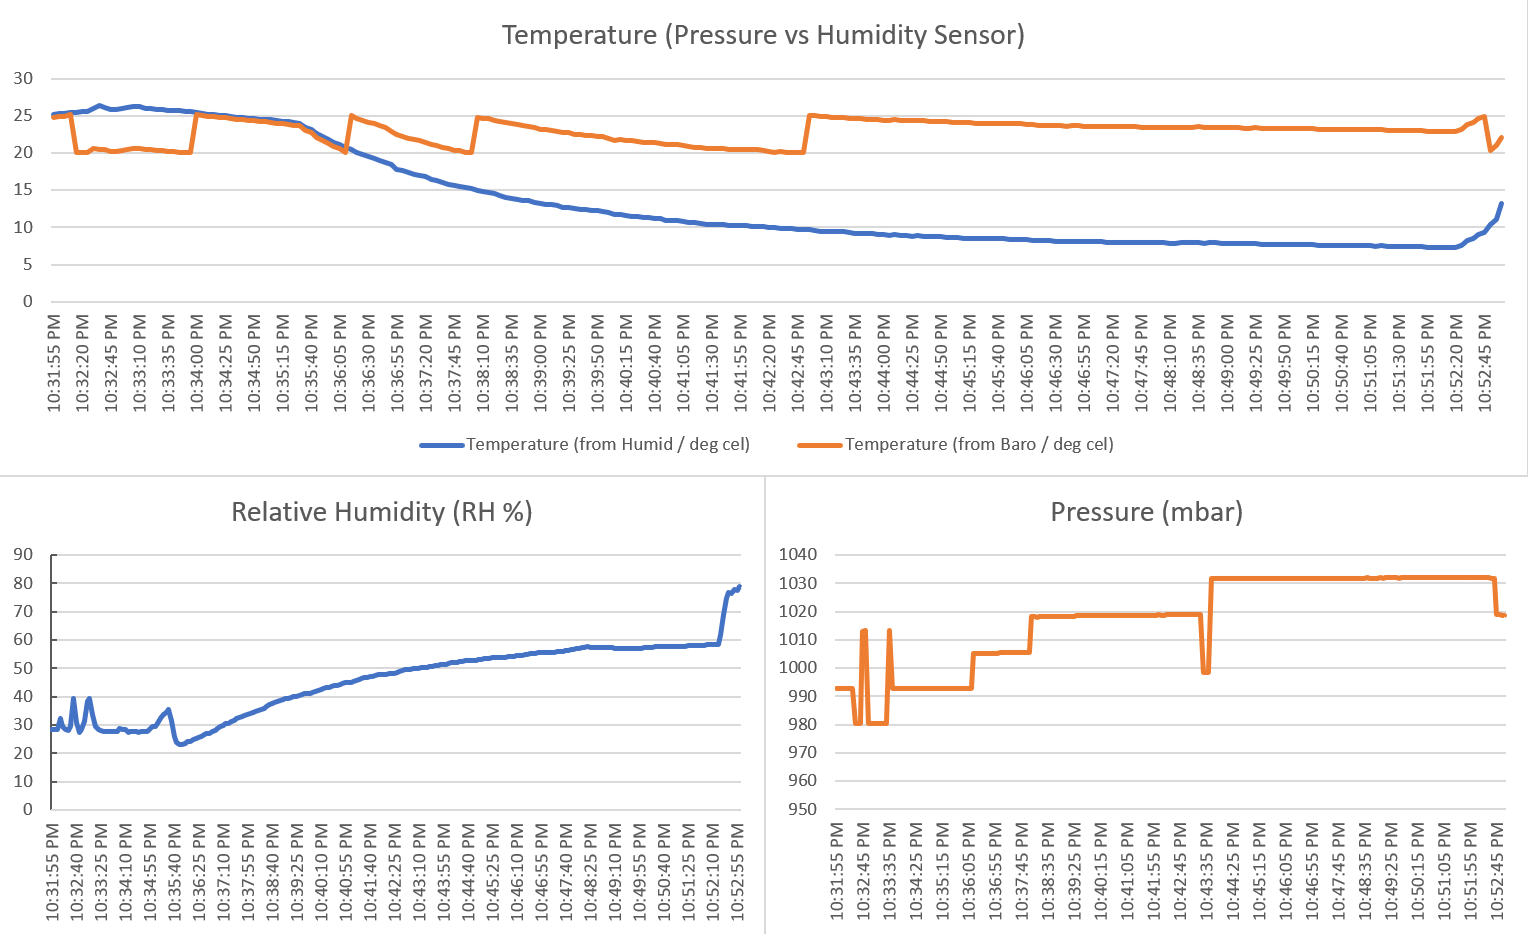 Excel graphs of temperature from both sensors, humidity, and pressure